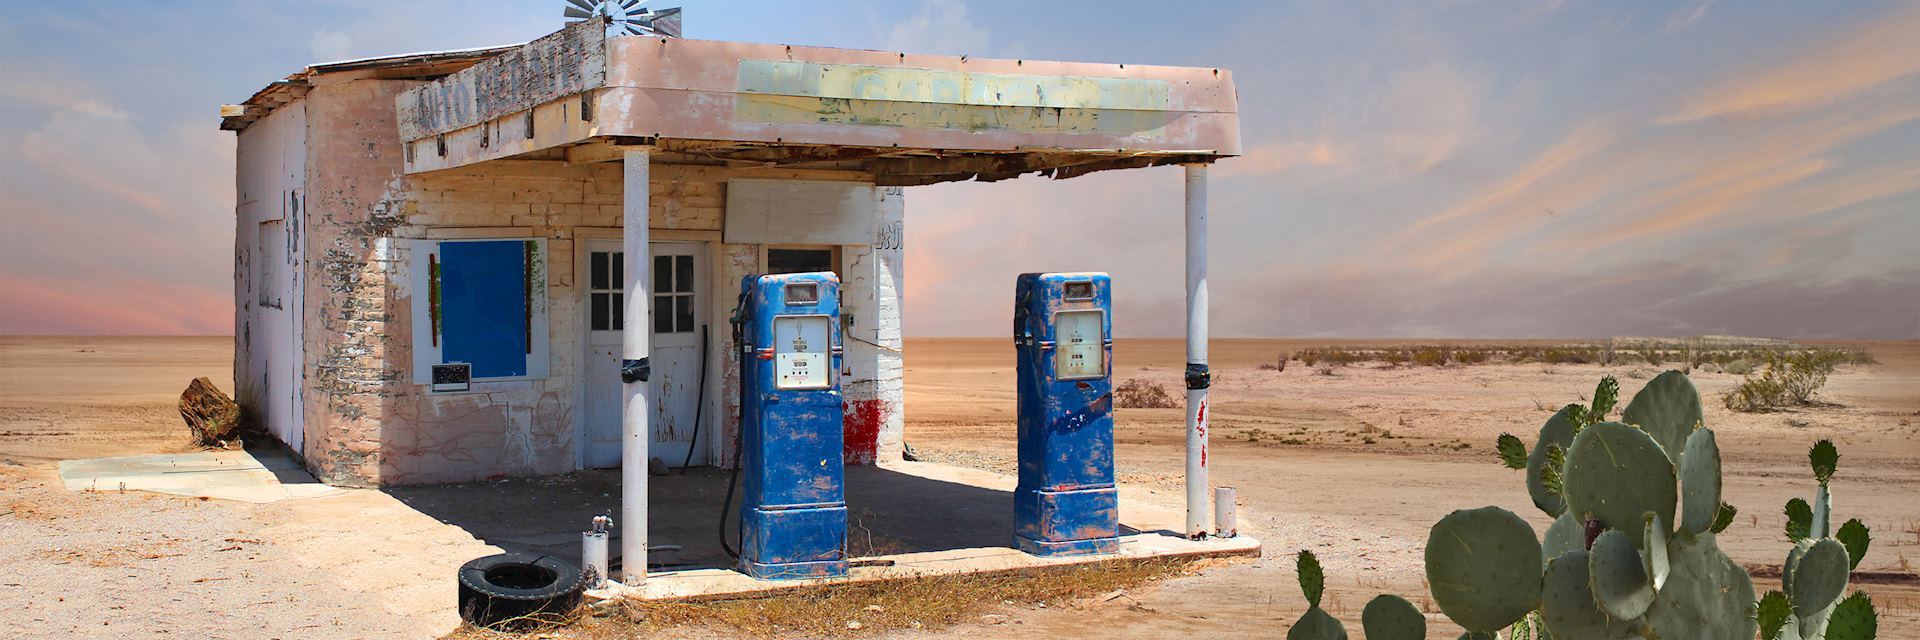 Gas station on Route 66